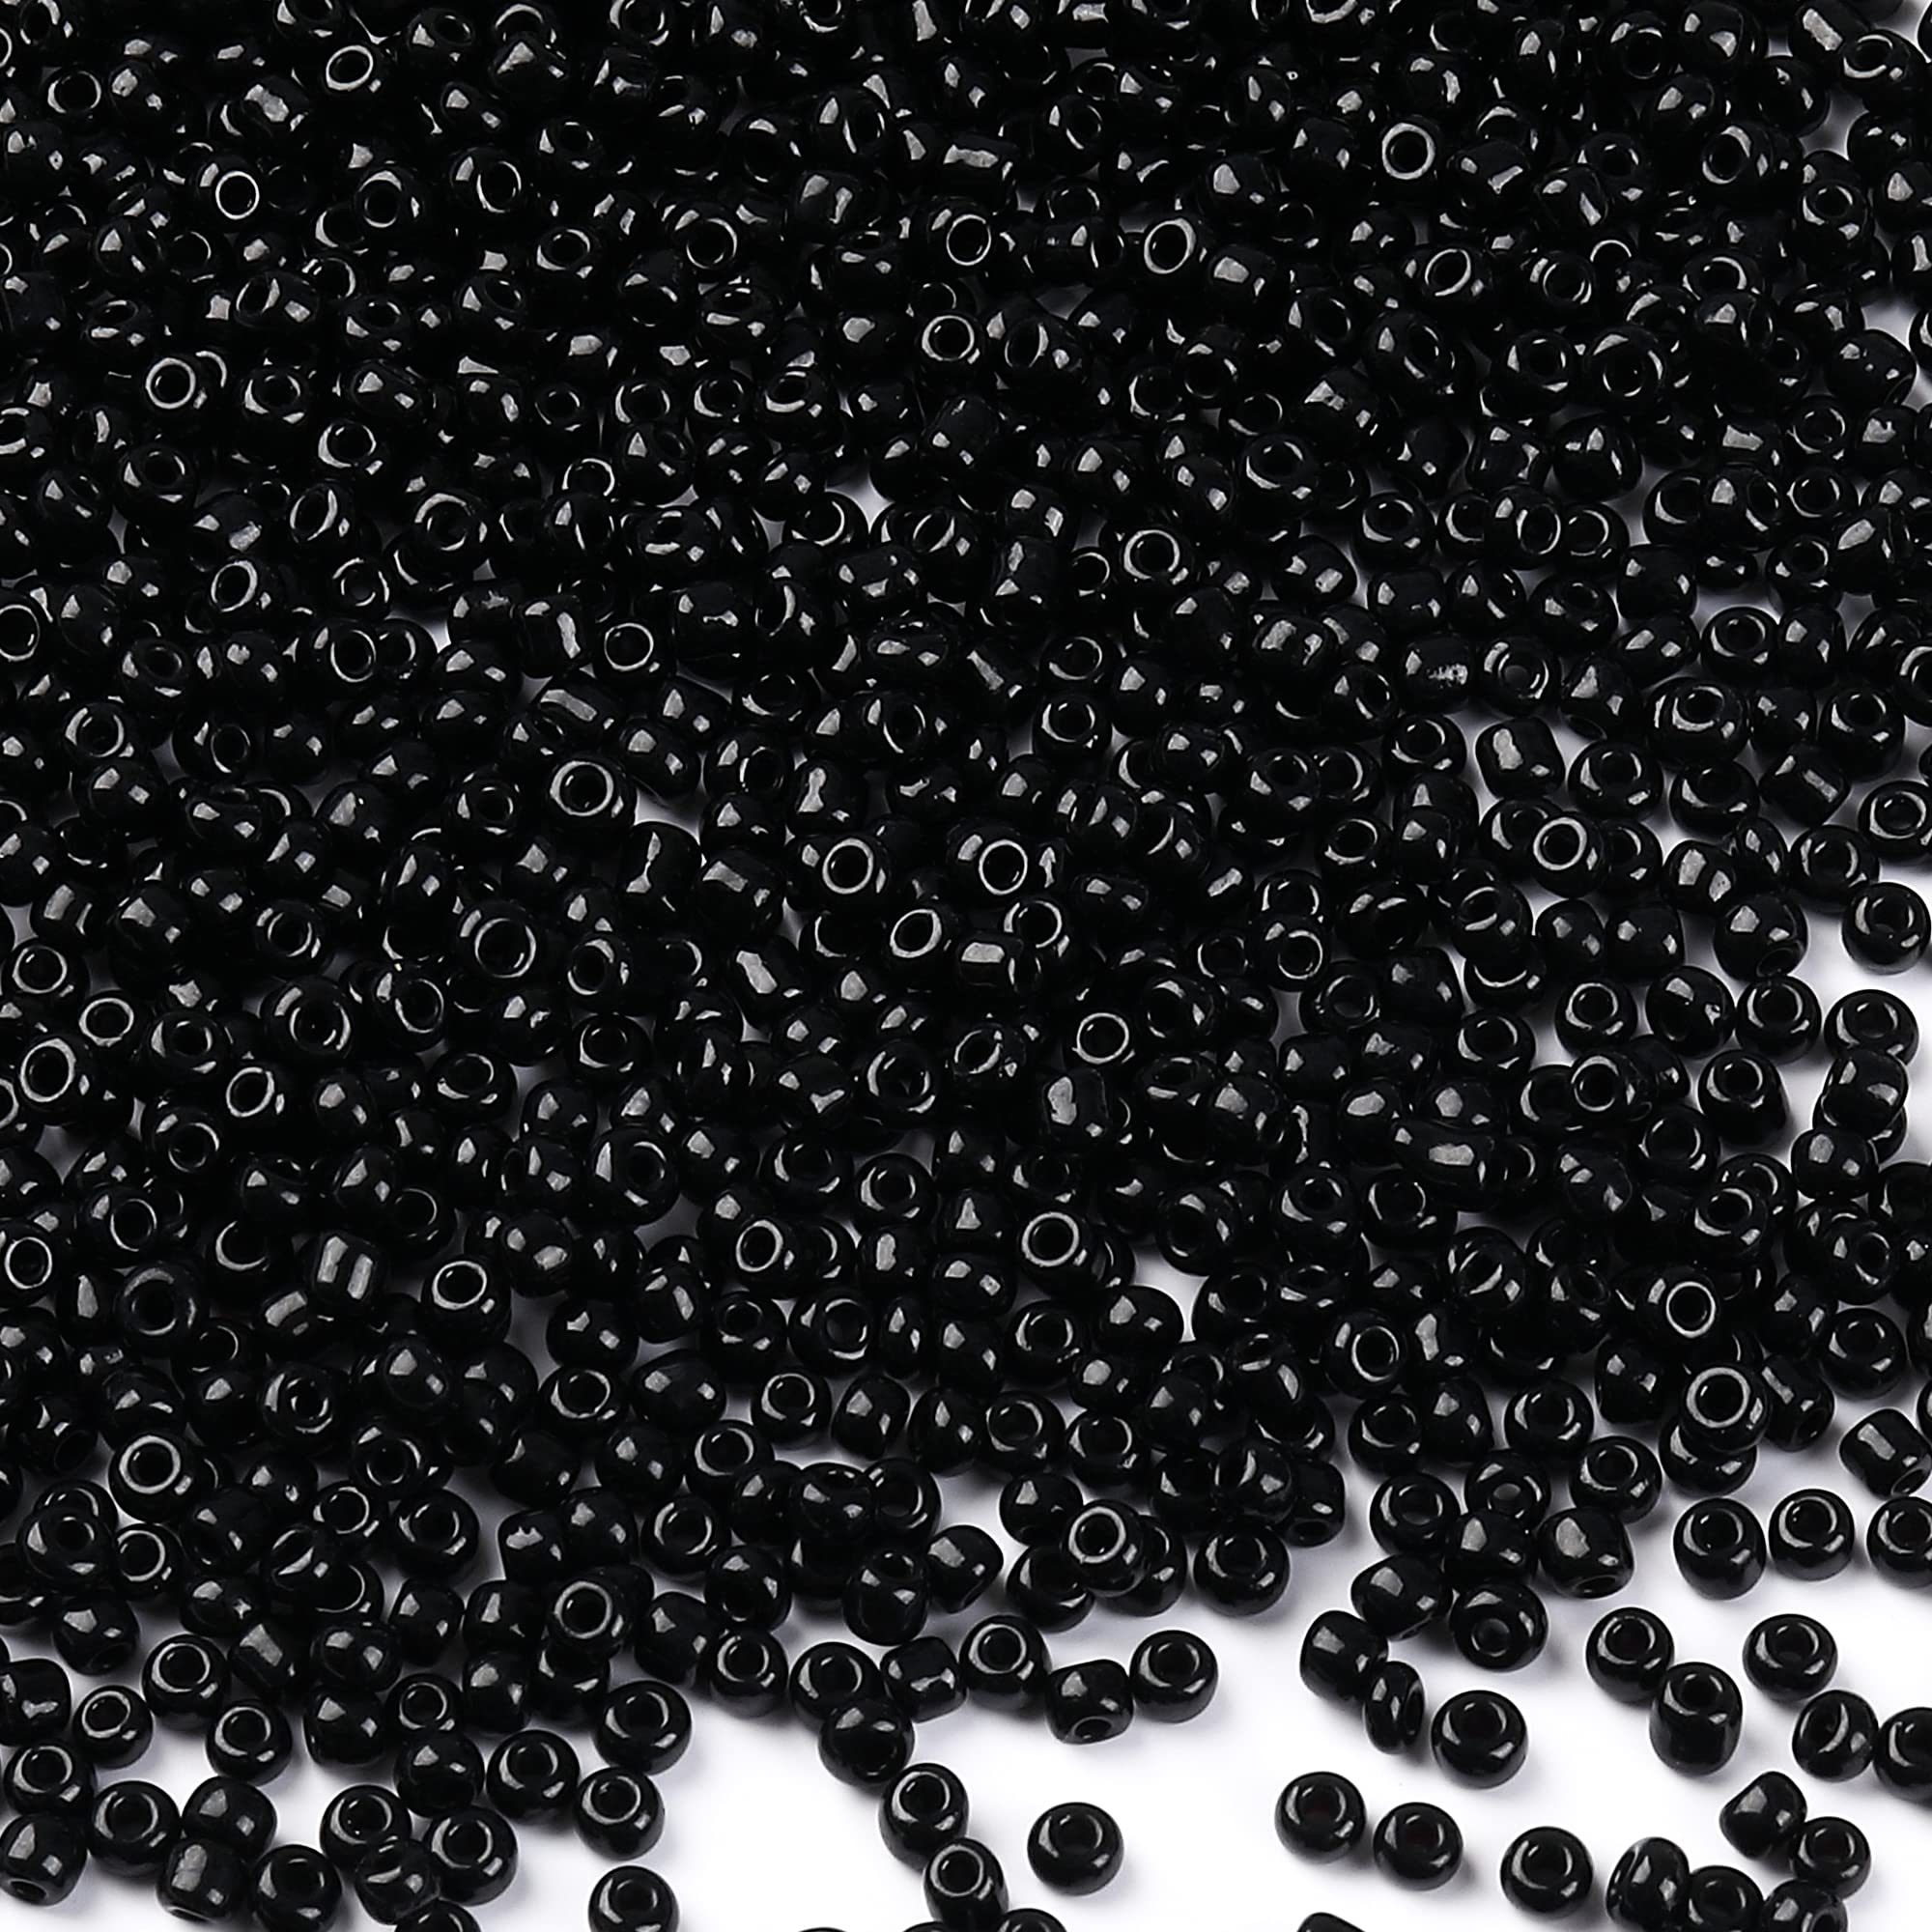 2400Pcs 6/0 4mm Glass Seed Beads for Jewelry Making, Bulk Pony Opaque Bead  Colorful Neon Beads Set for DIY Bracelet Earring Necklace Craft with Crystal  Elastic String black 4mm